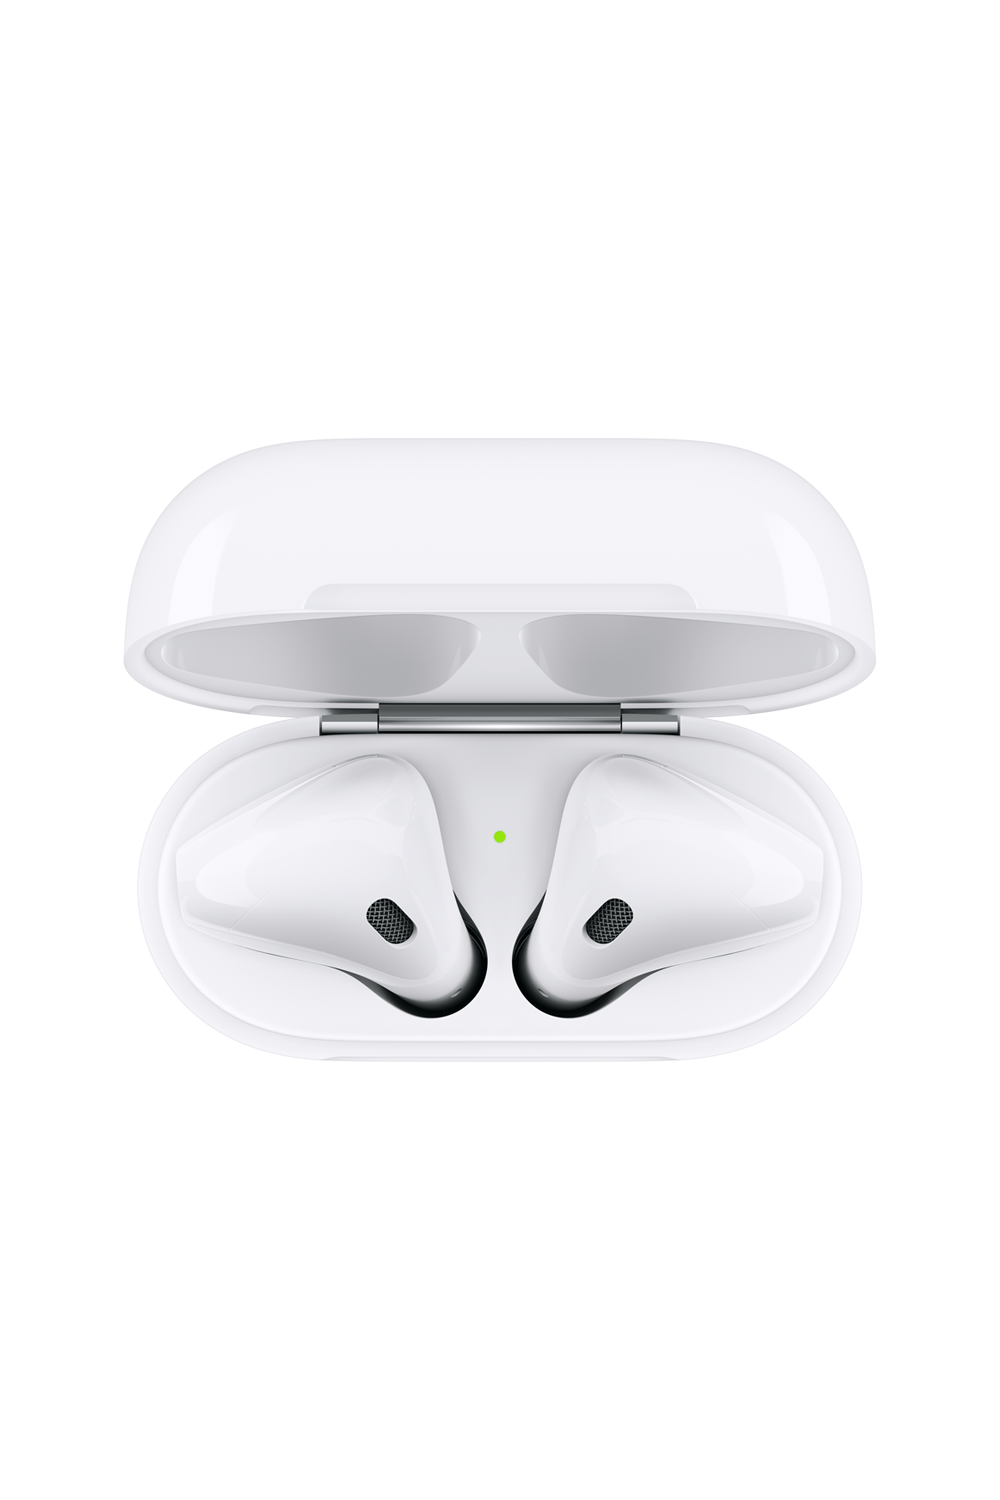 Apple AirPods With Charging Case (2nd Generation) - QuickTech.in